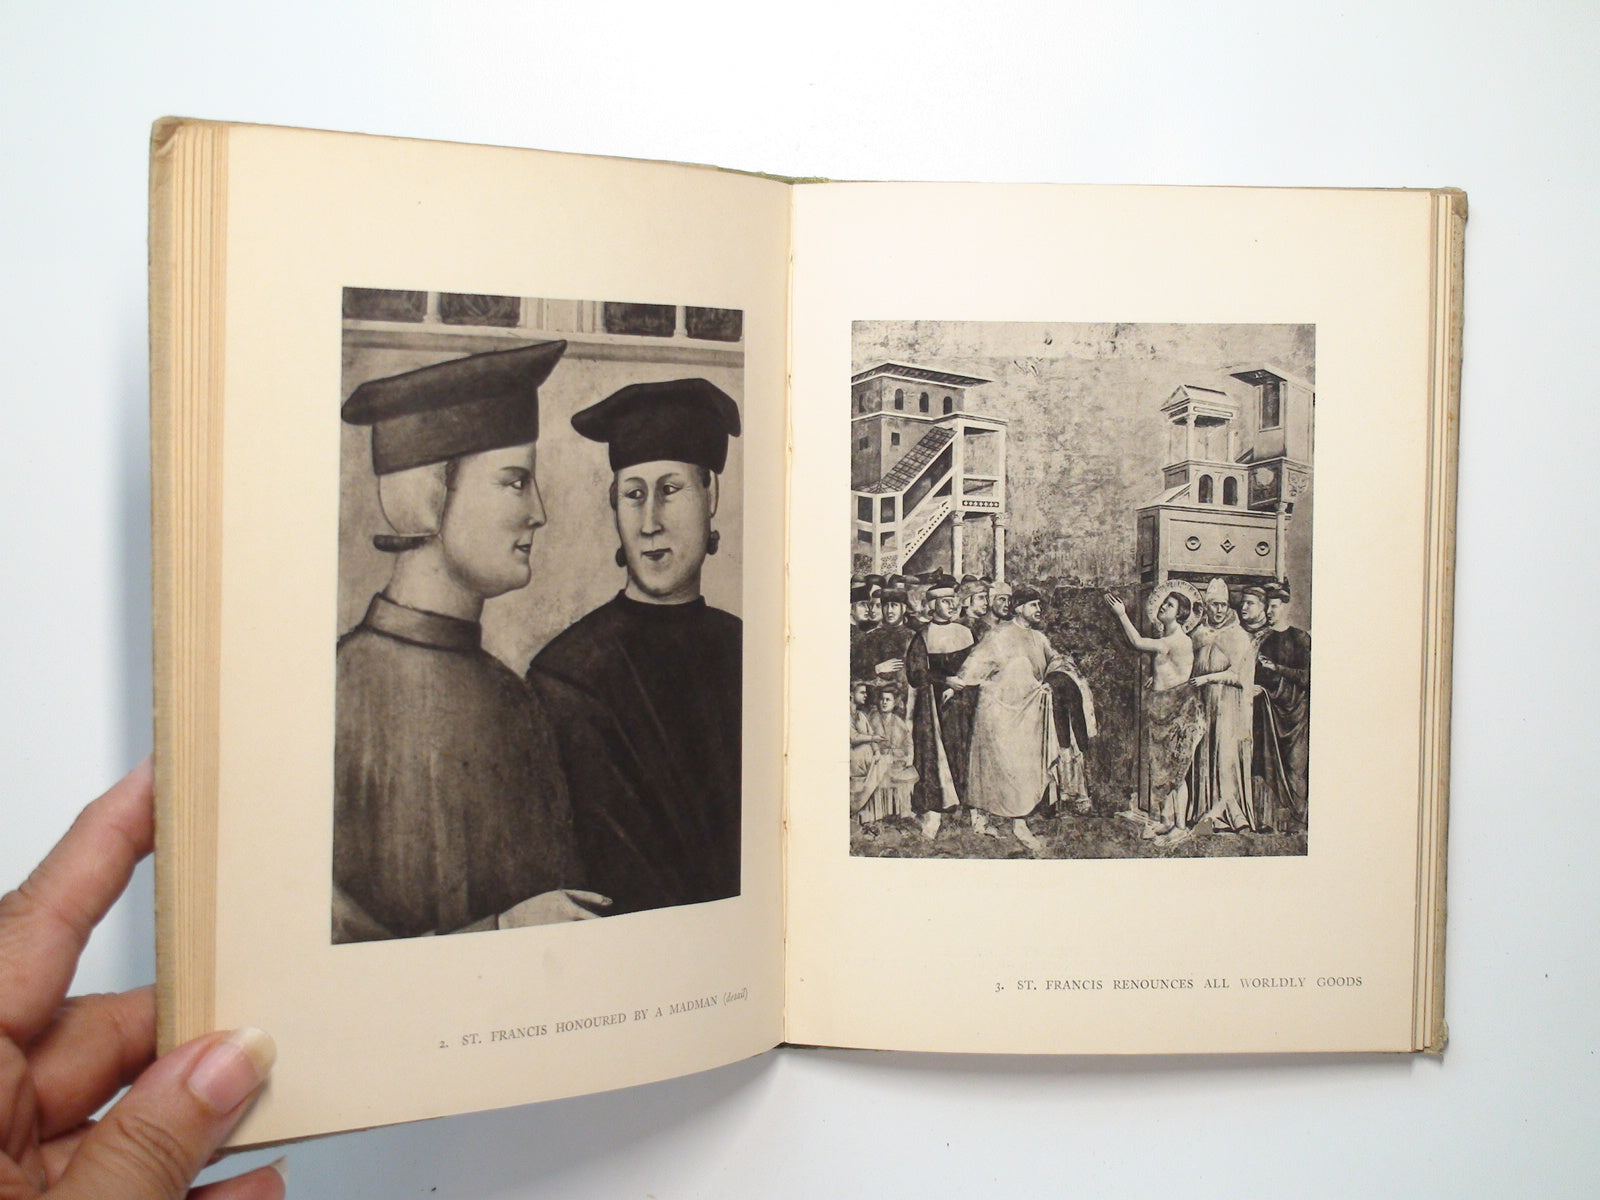 The Great Painters, Giotto, Illustrated, The Medici Society, 1931